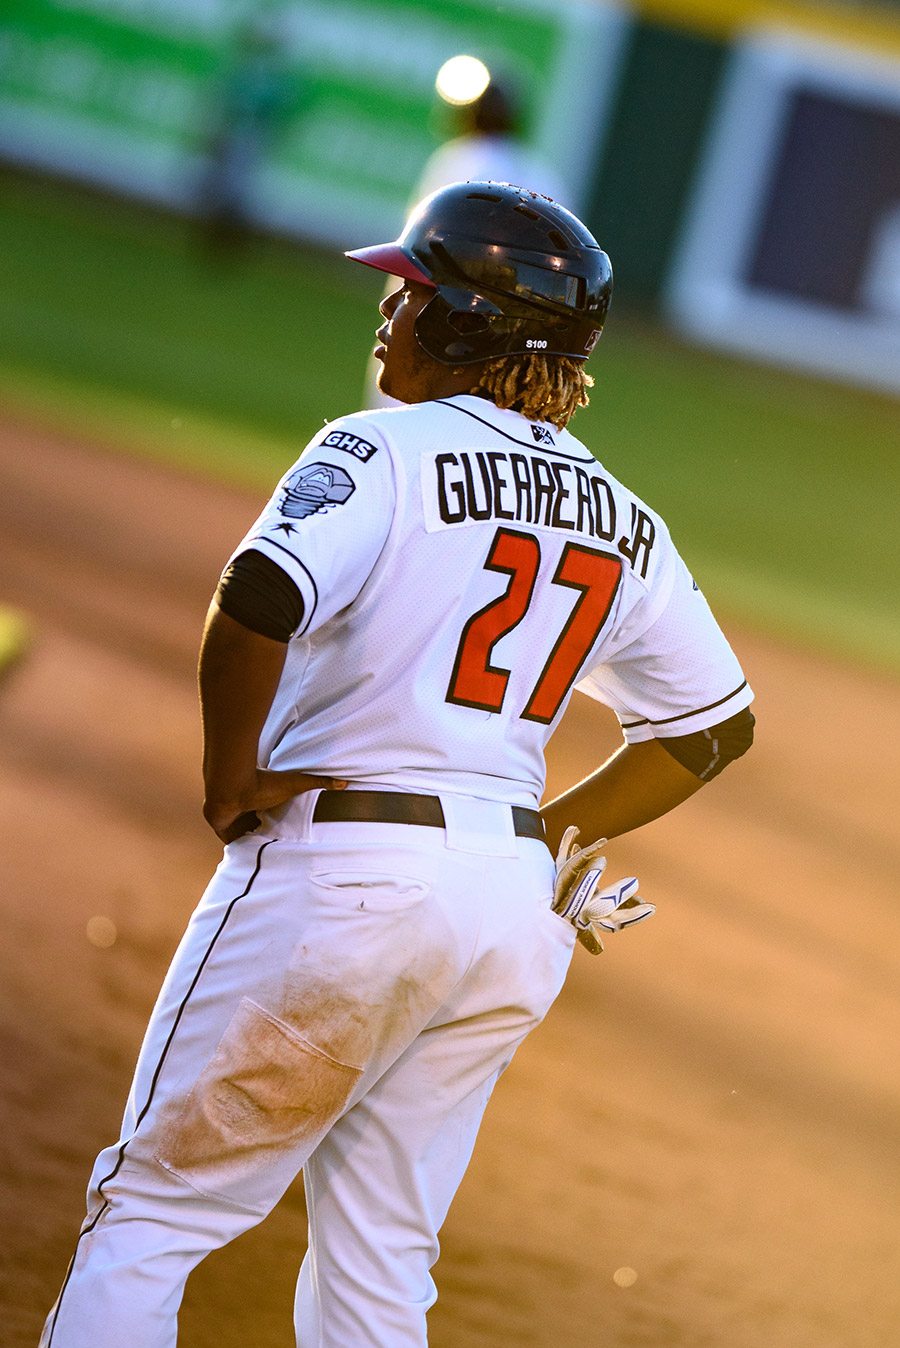 Vladimir Guerrero Jr. is campaigning for Vlad Sr. to be elected